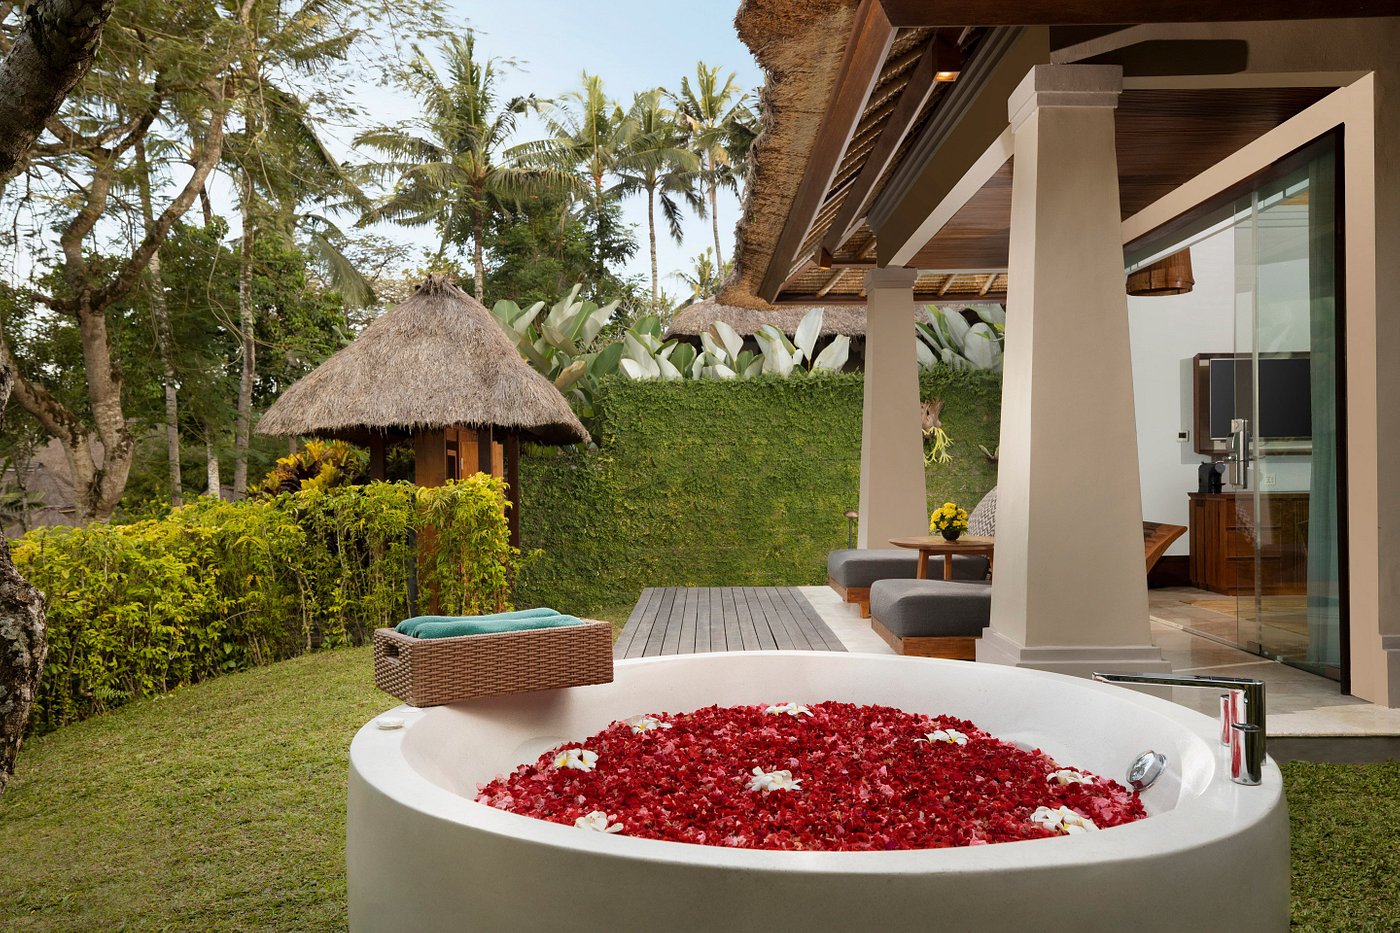 The Most Romantic Hotels In Bali